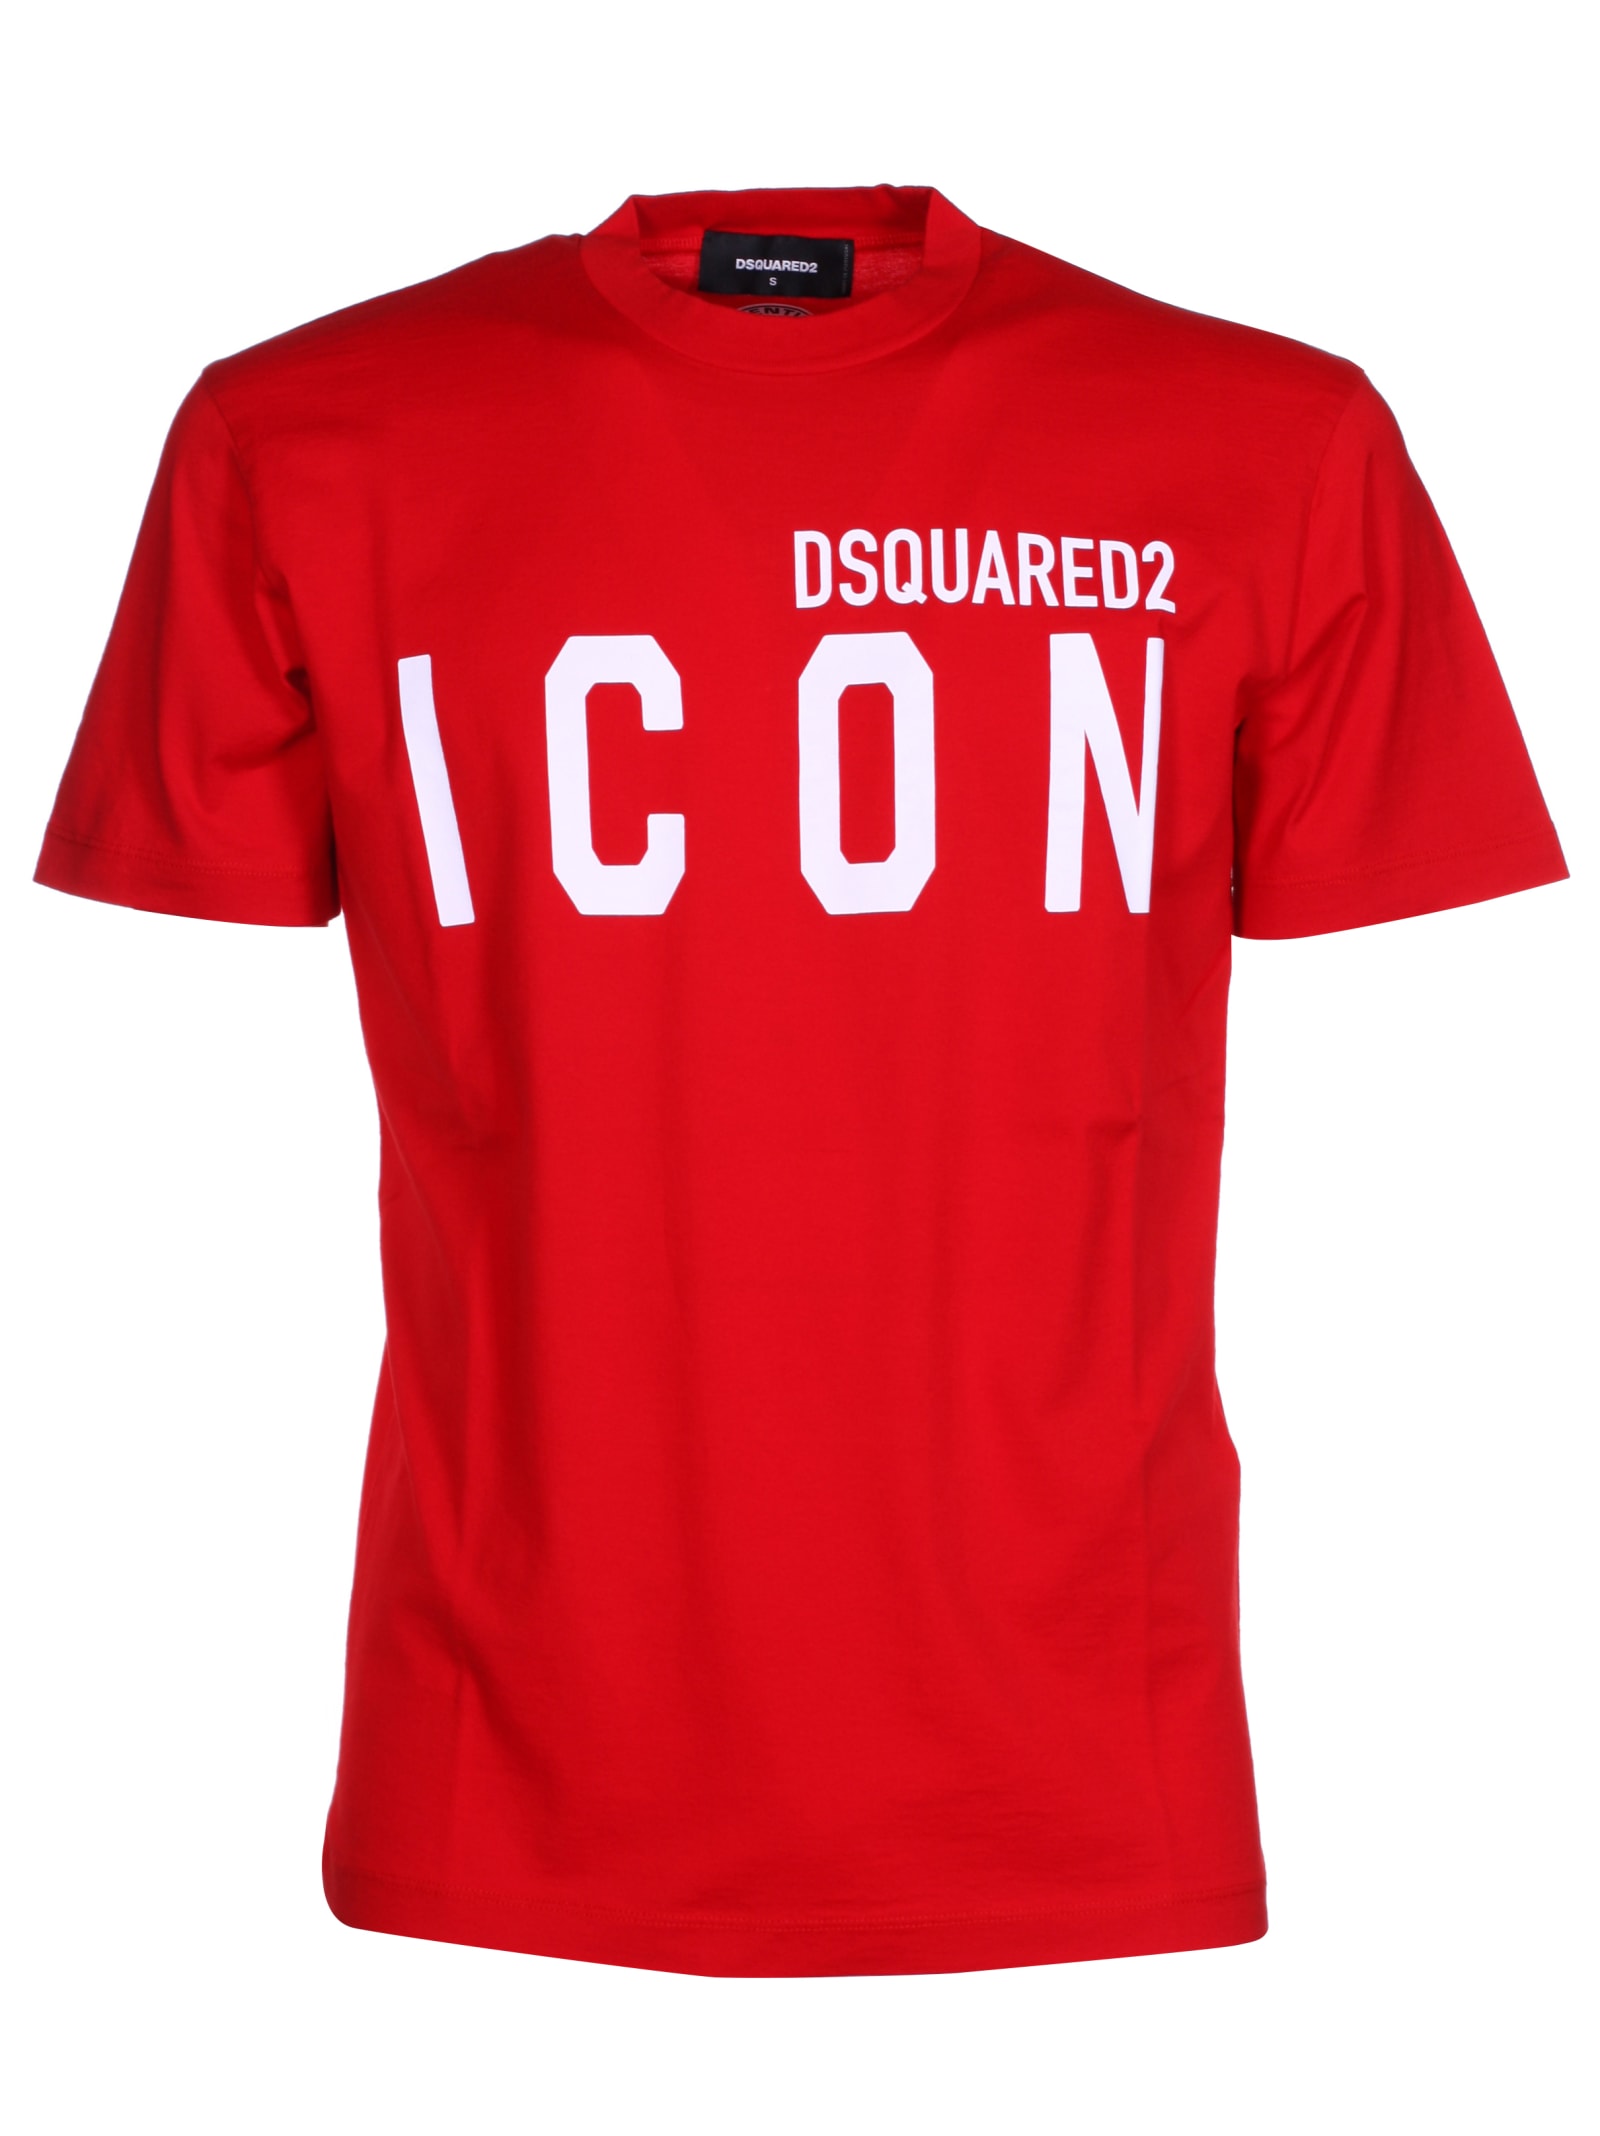 DSQUARED2 ICON T-SHIRT,11308233